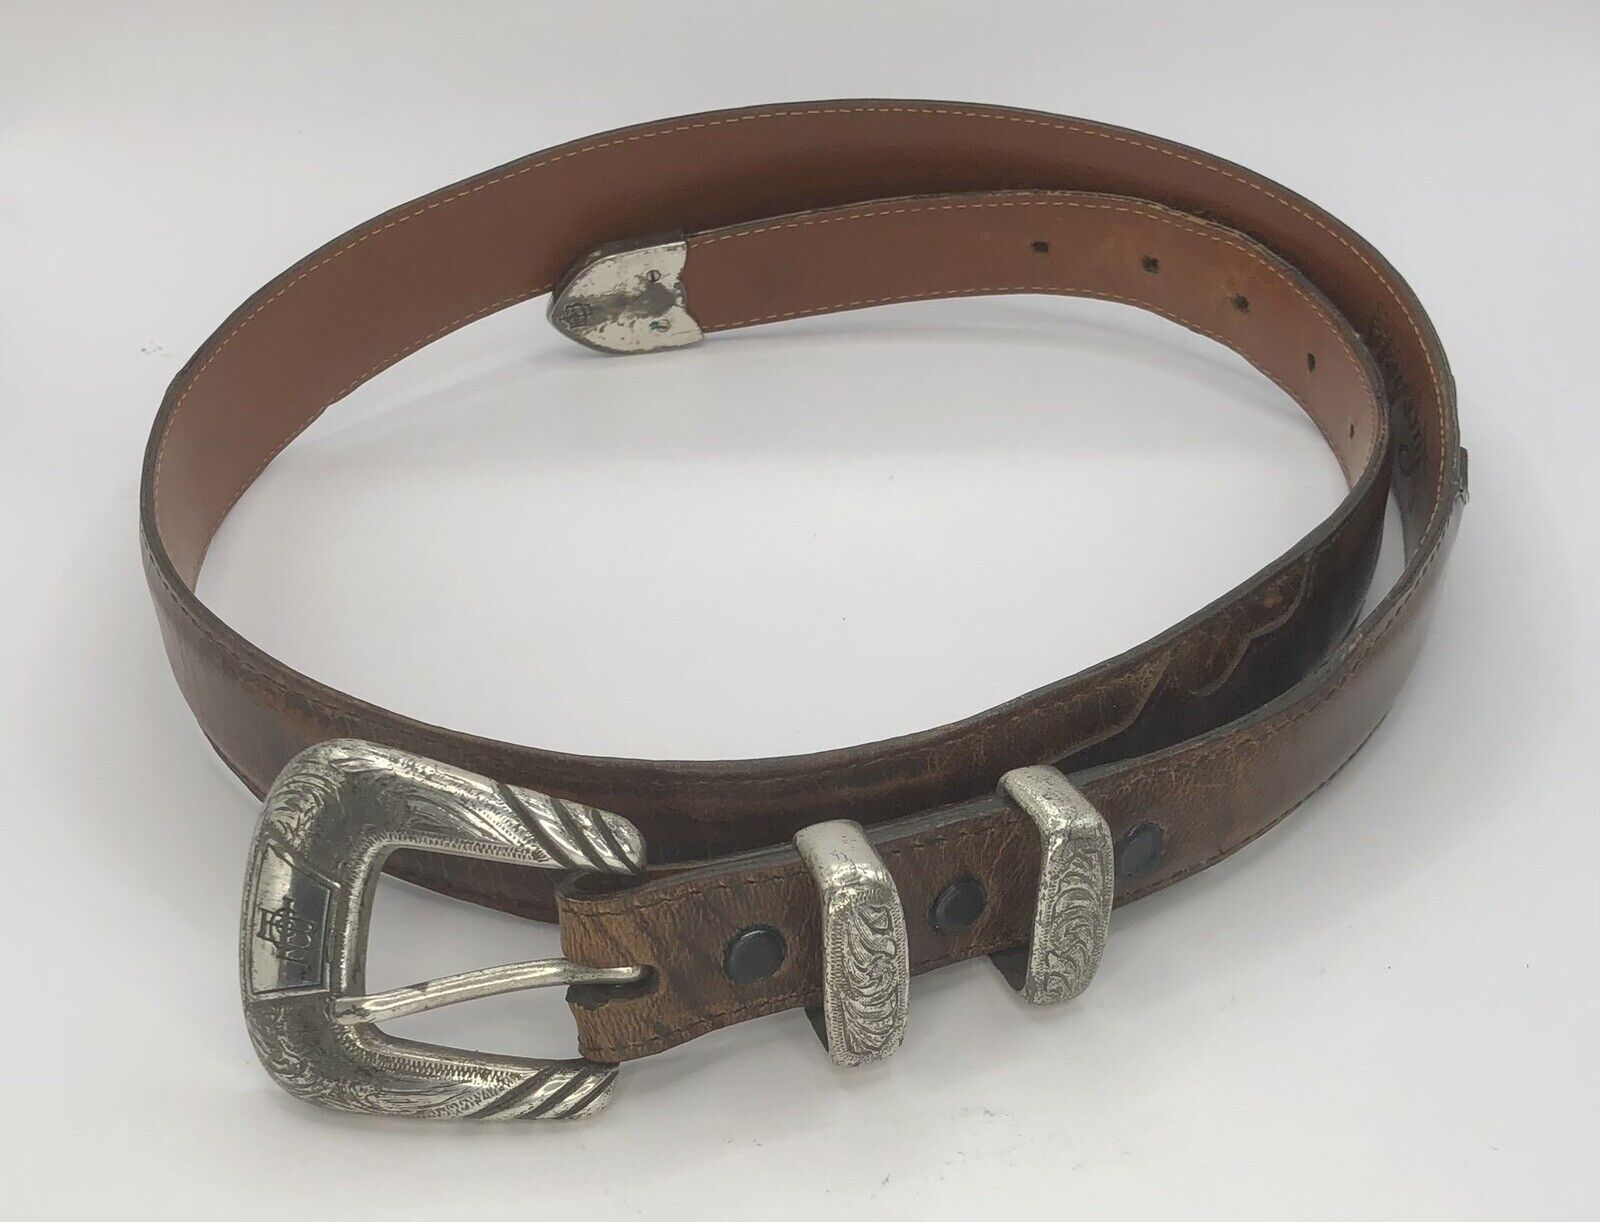 LUCCHESE Classics Belt And Buckle Western 36 Brown Genuine Leather W0787.